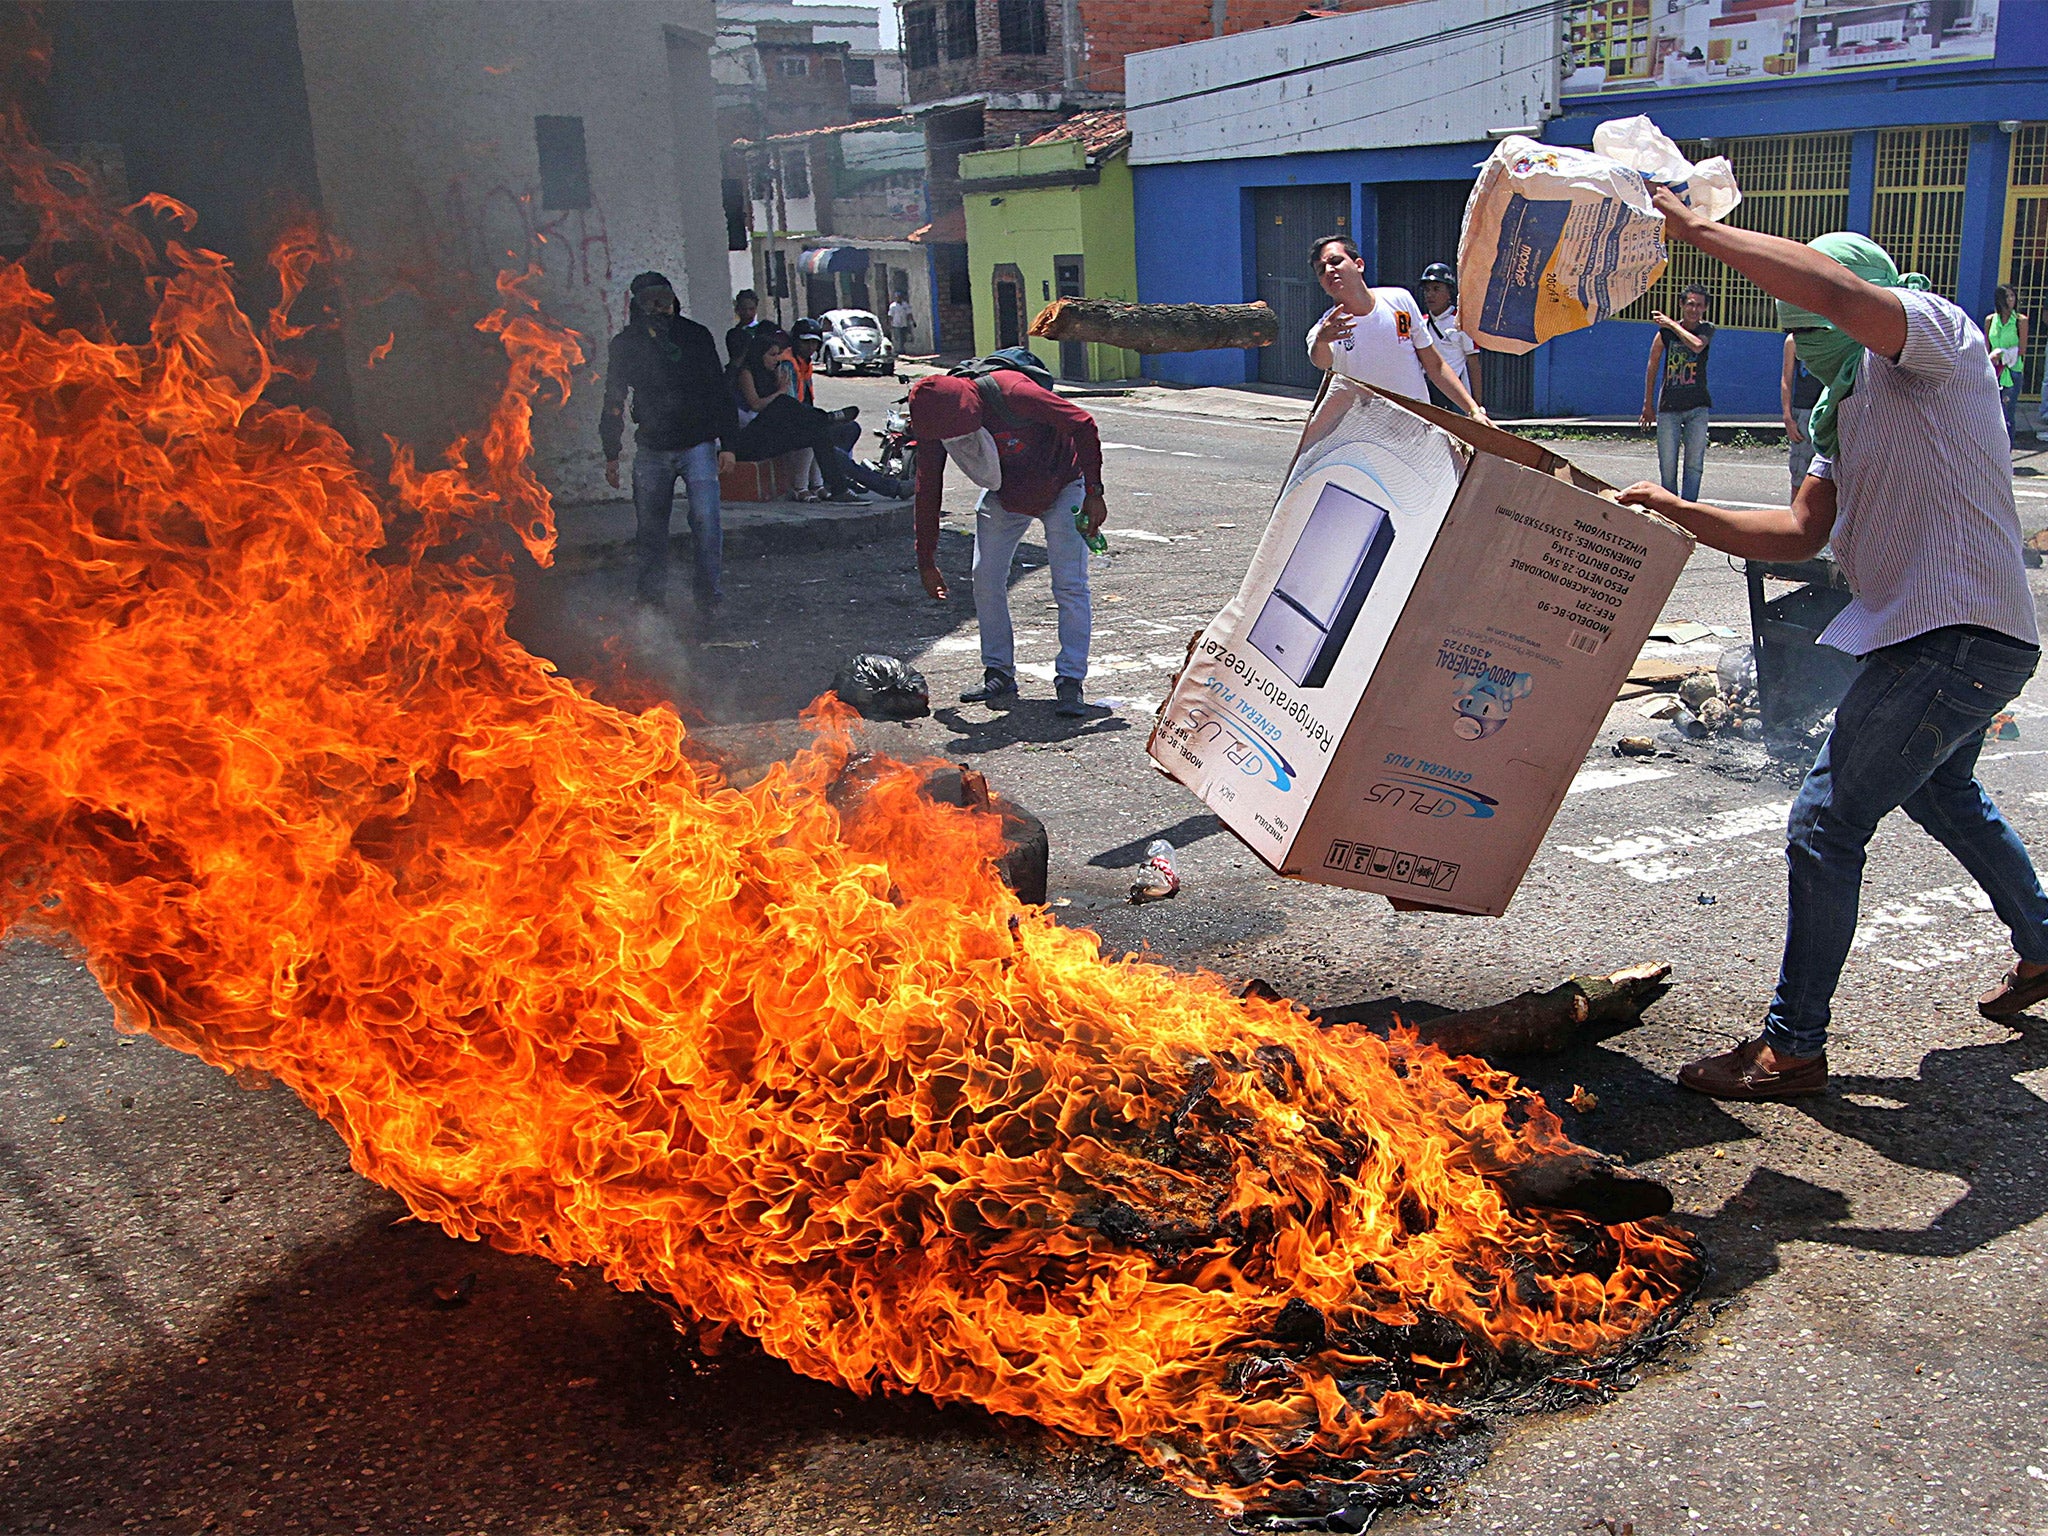 A group of students burn tyres during a protest against the Venezuelan government, in San Cristobal, on Tuesday (Getty)